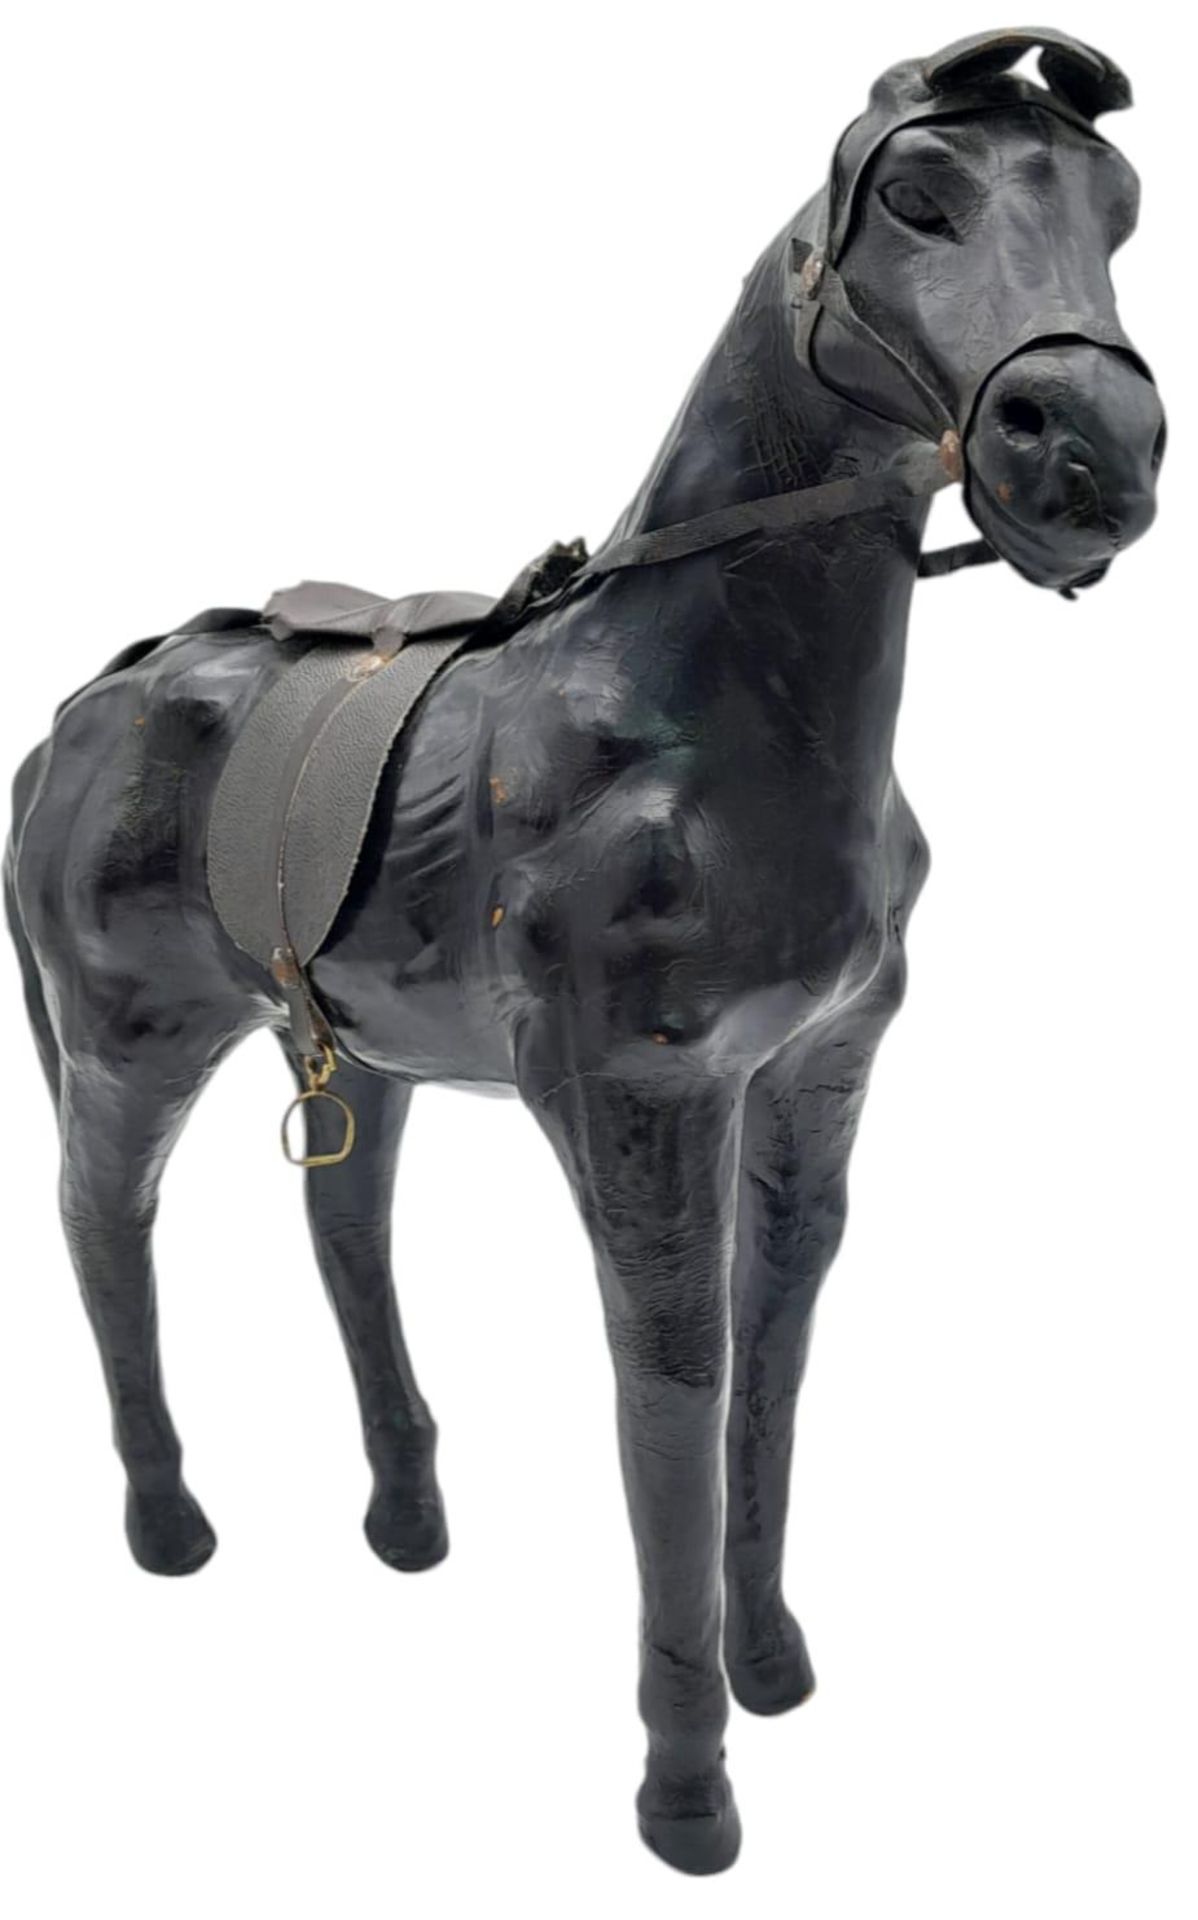 A Vintage Leather Liberty Style Leather Horse - Probably made by Liberty's in the 1960s. Amazing